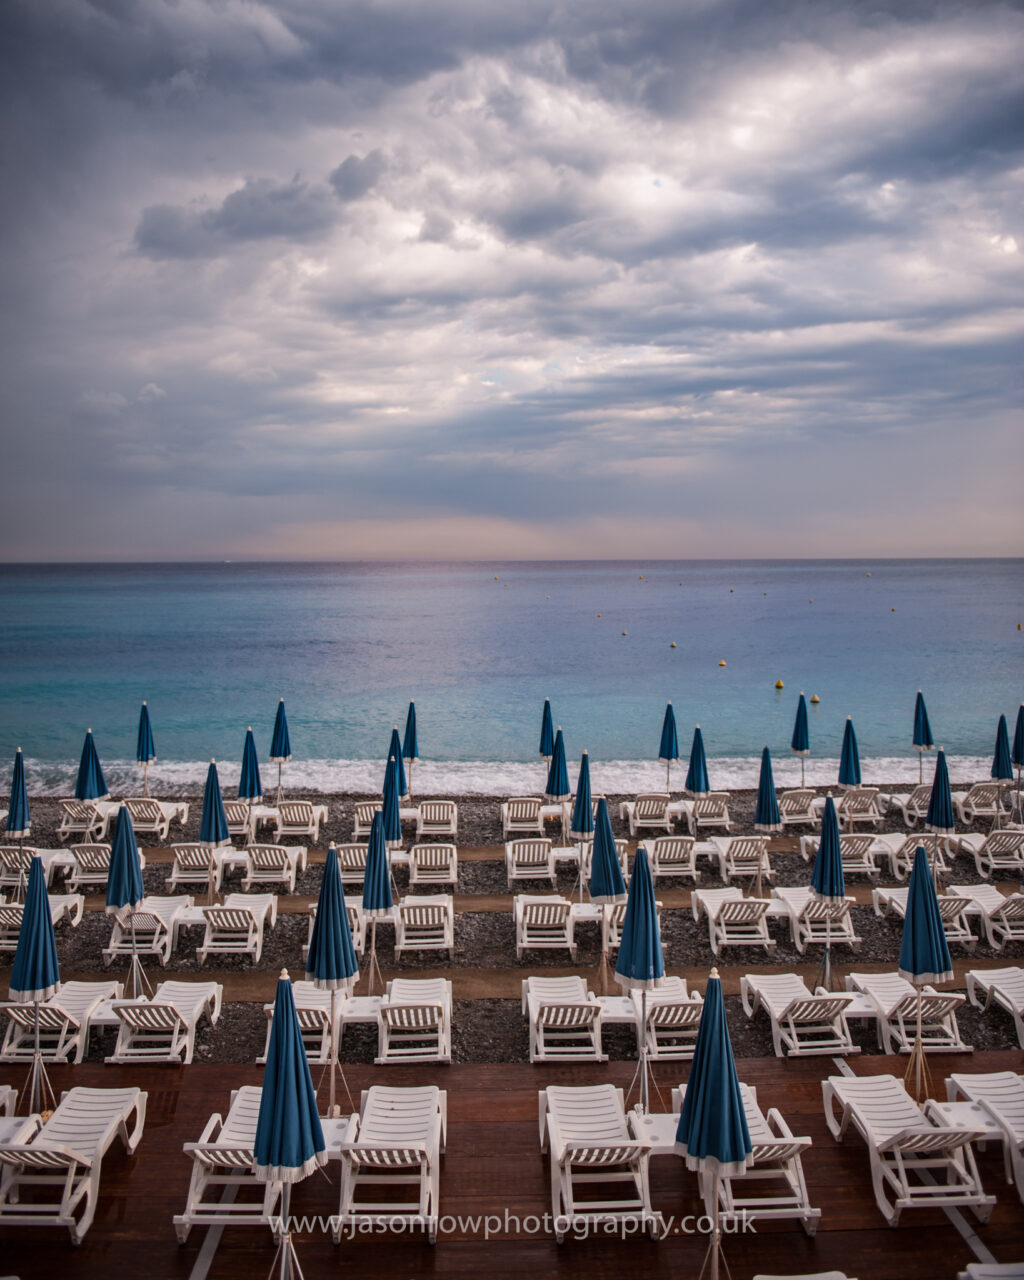 A deserted beach full of sun loungers in the off season in Nice, France 